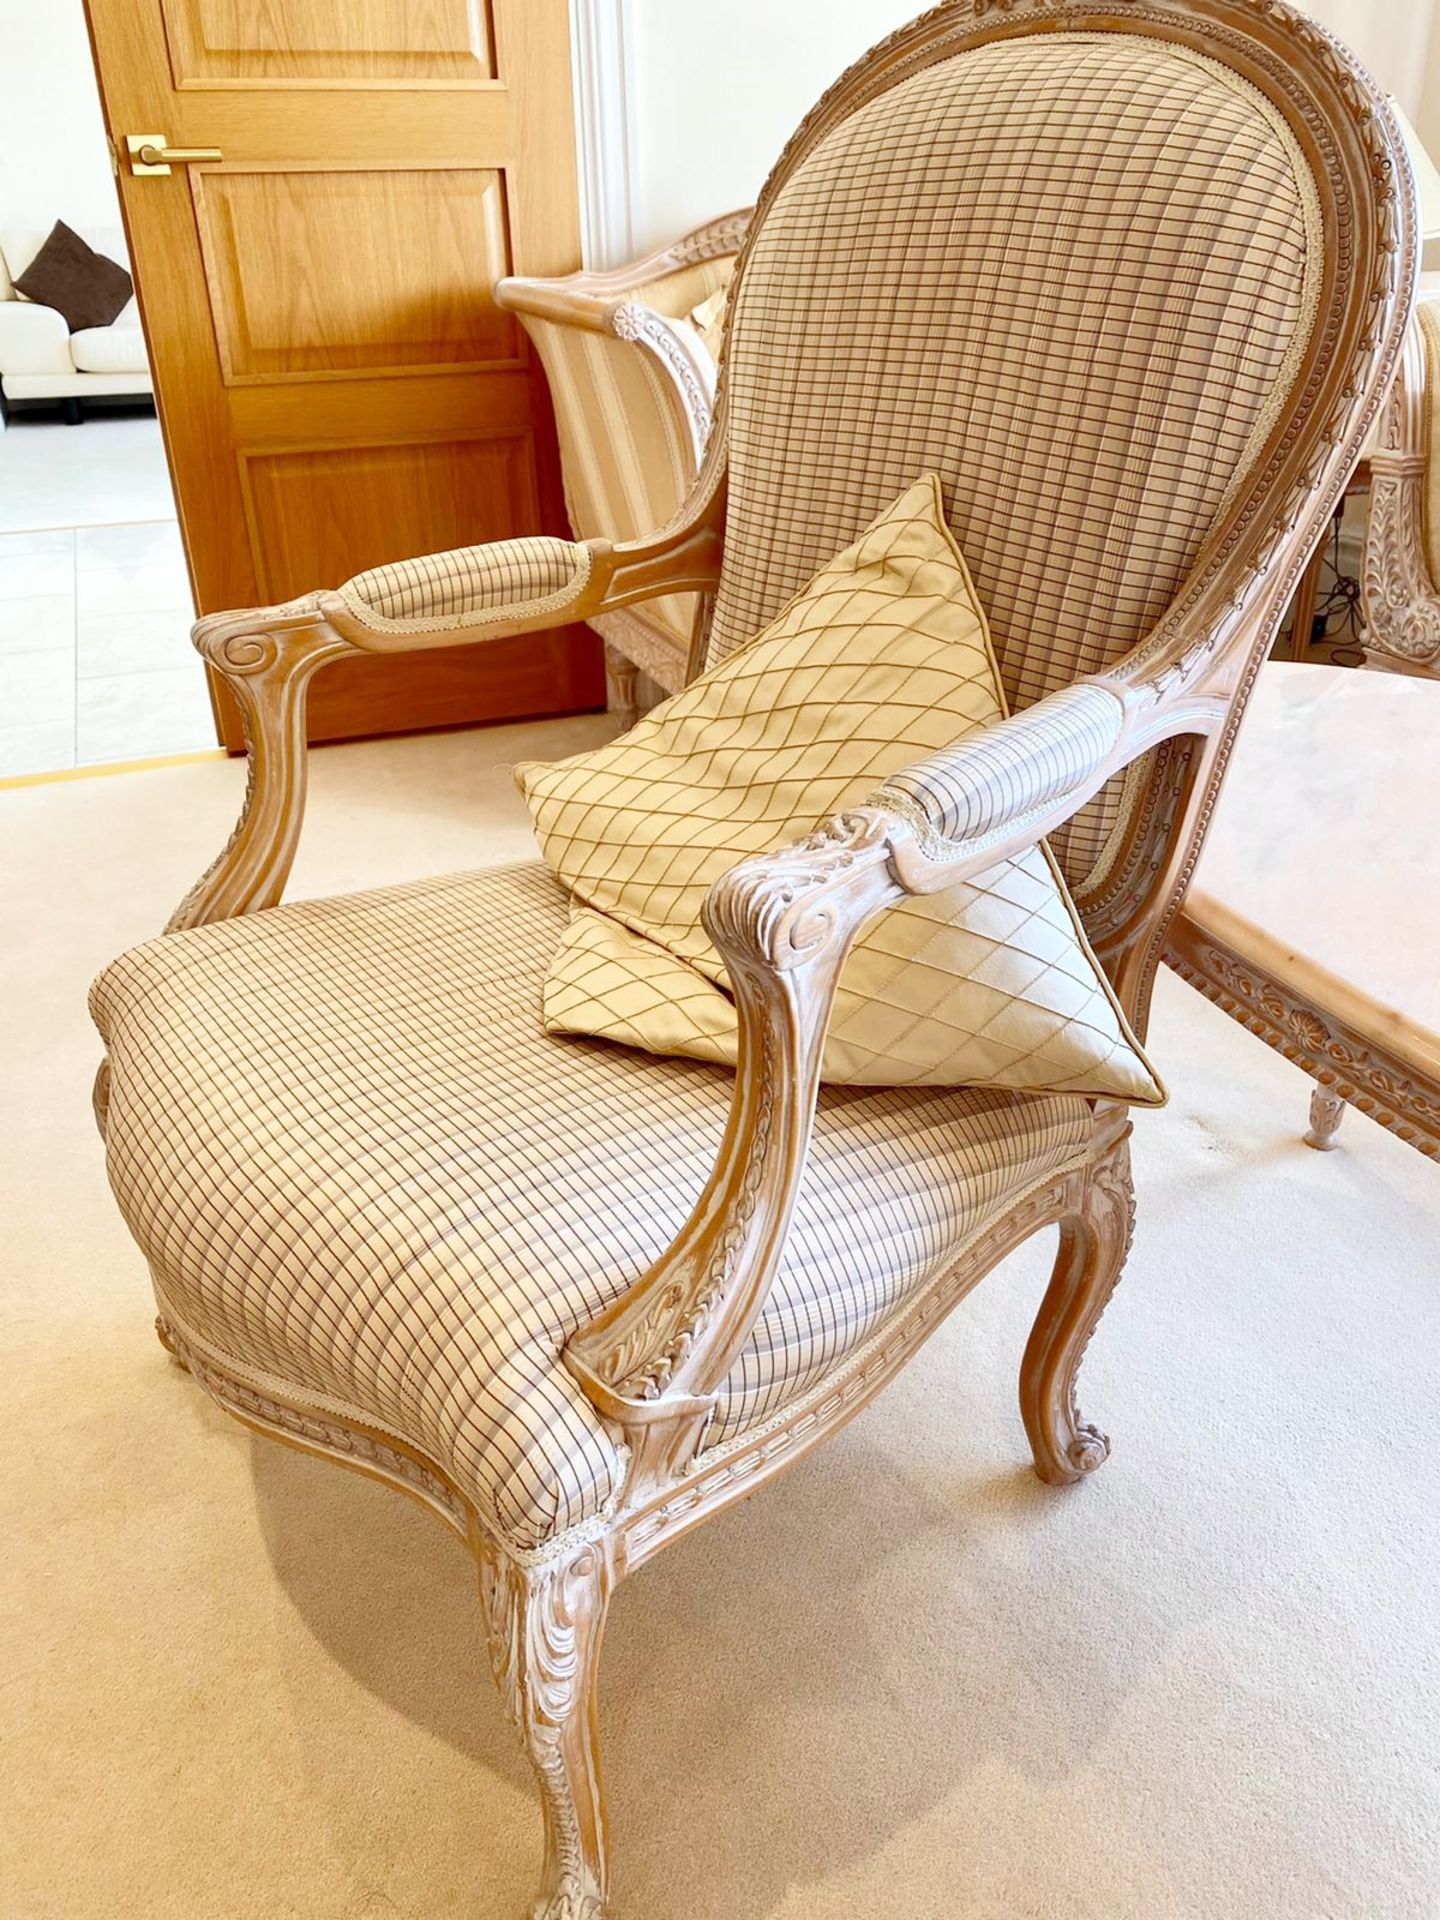 Pair of French Shabby Chic Bedroom Chairs - Stunning Carved Wood Chair Upholstered With Striped - Image 15 of 16